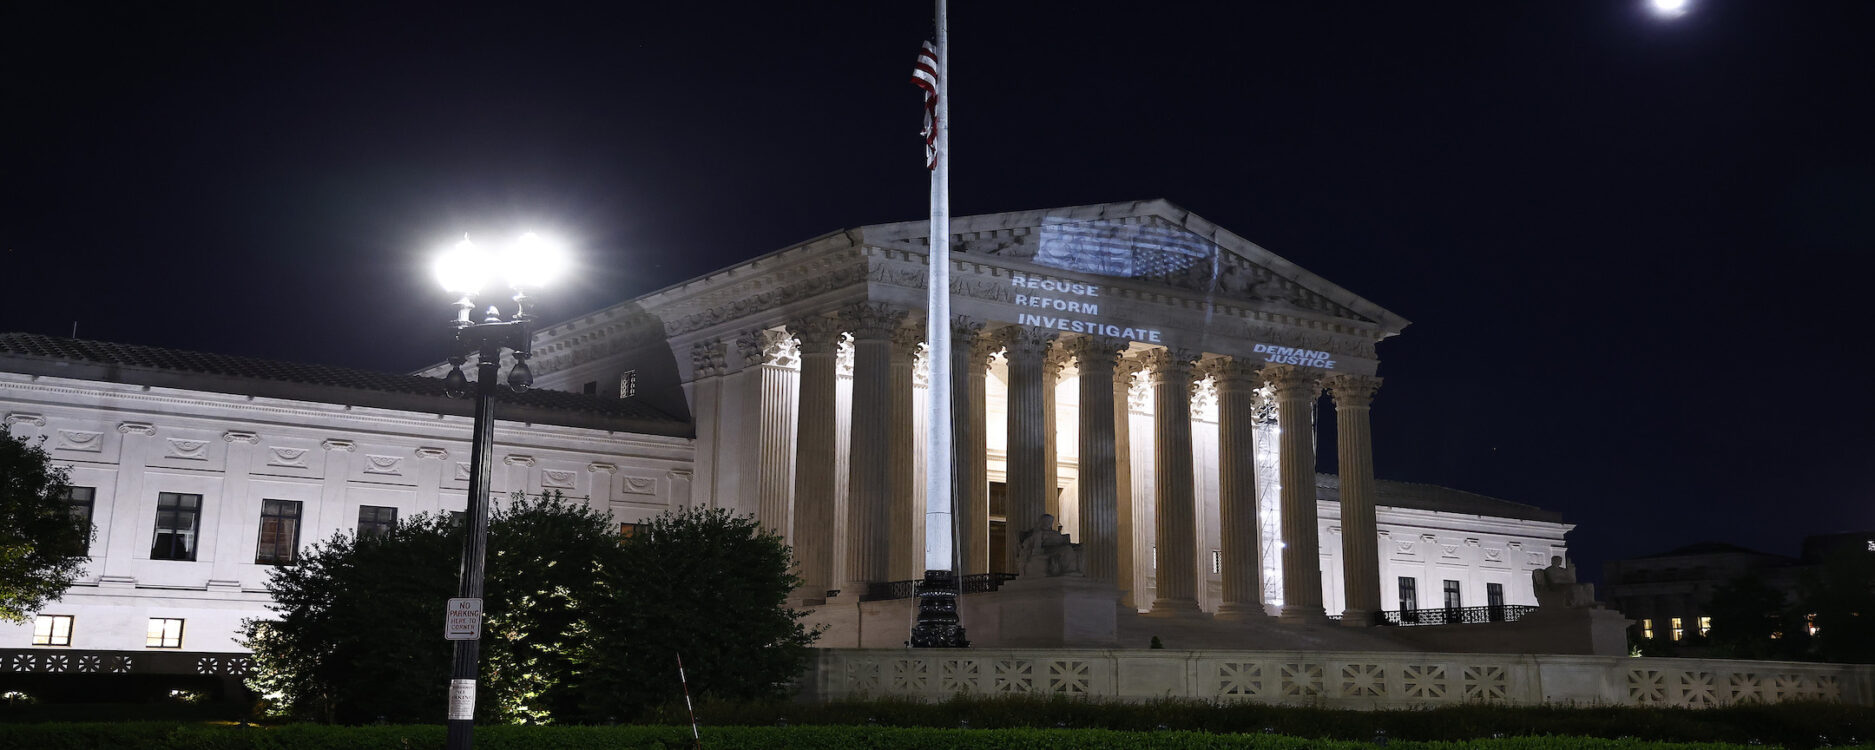 A photo of the Supreme Court with the words "recuse, reform, investigate" and an upside down American flag projected onto it.